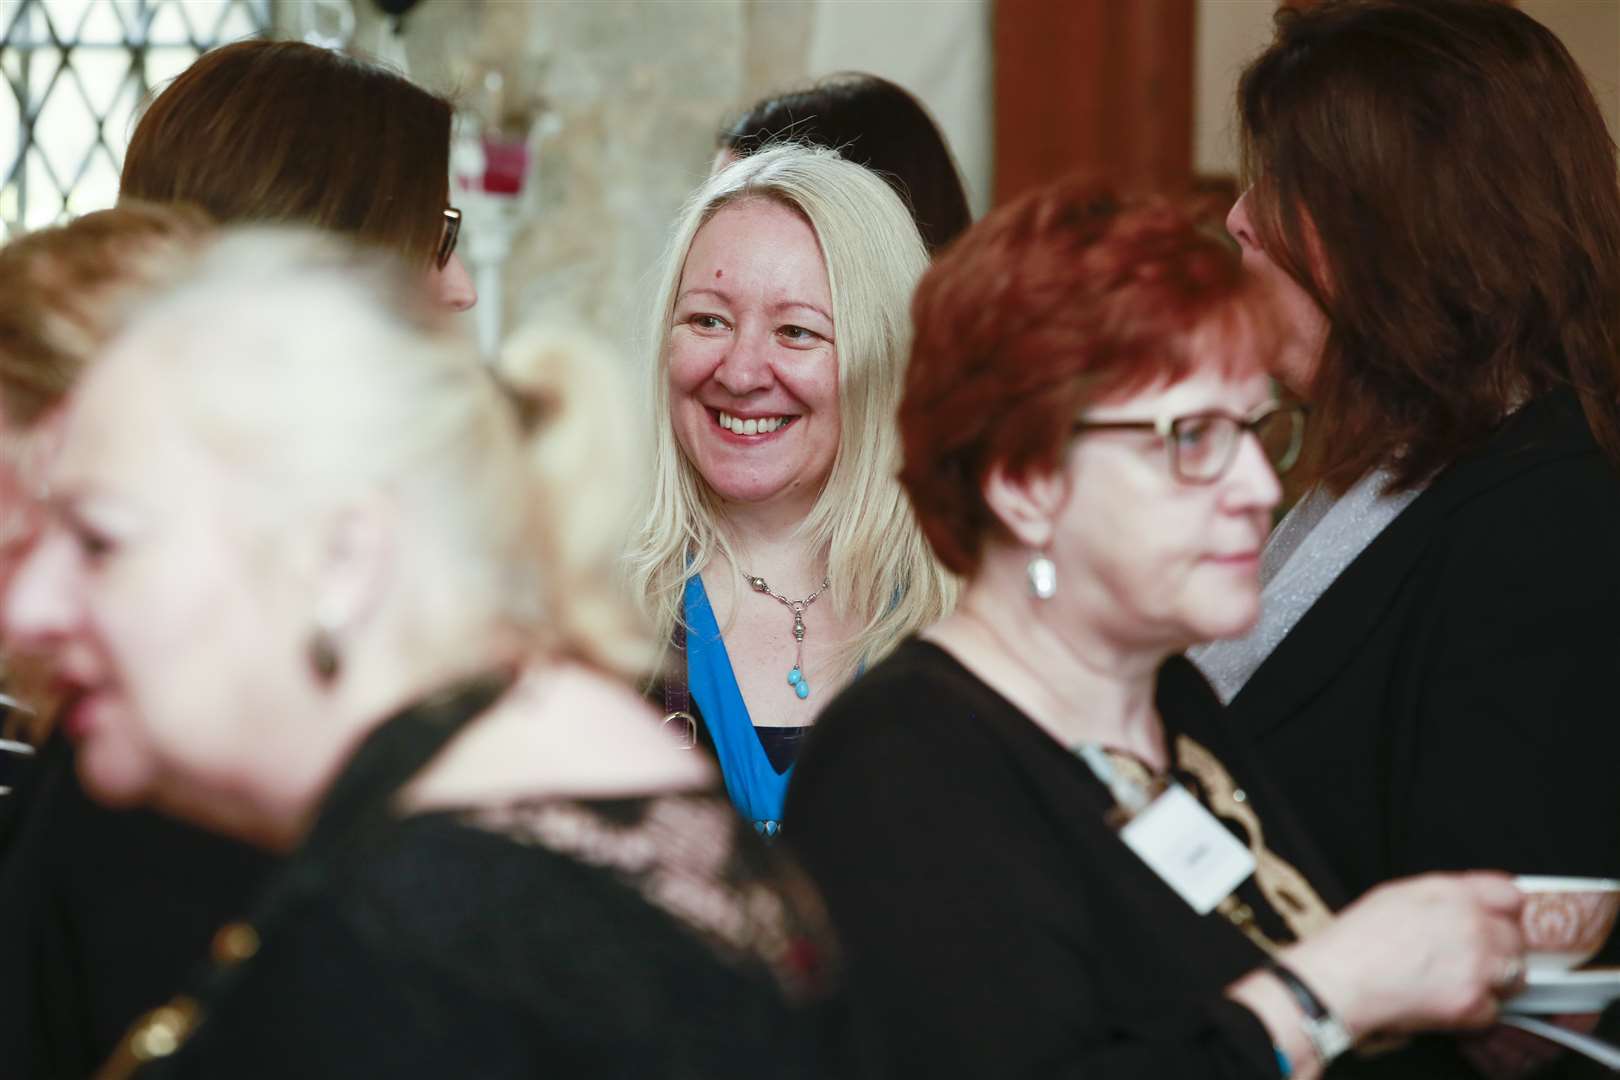 Kathryn Cooper was among the networkers at the launch of the Evo Girls social enterprise